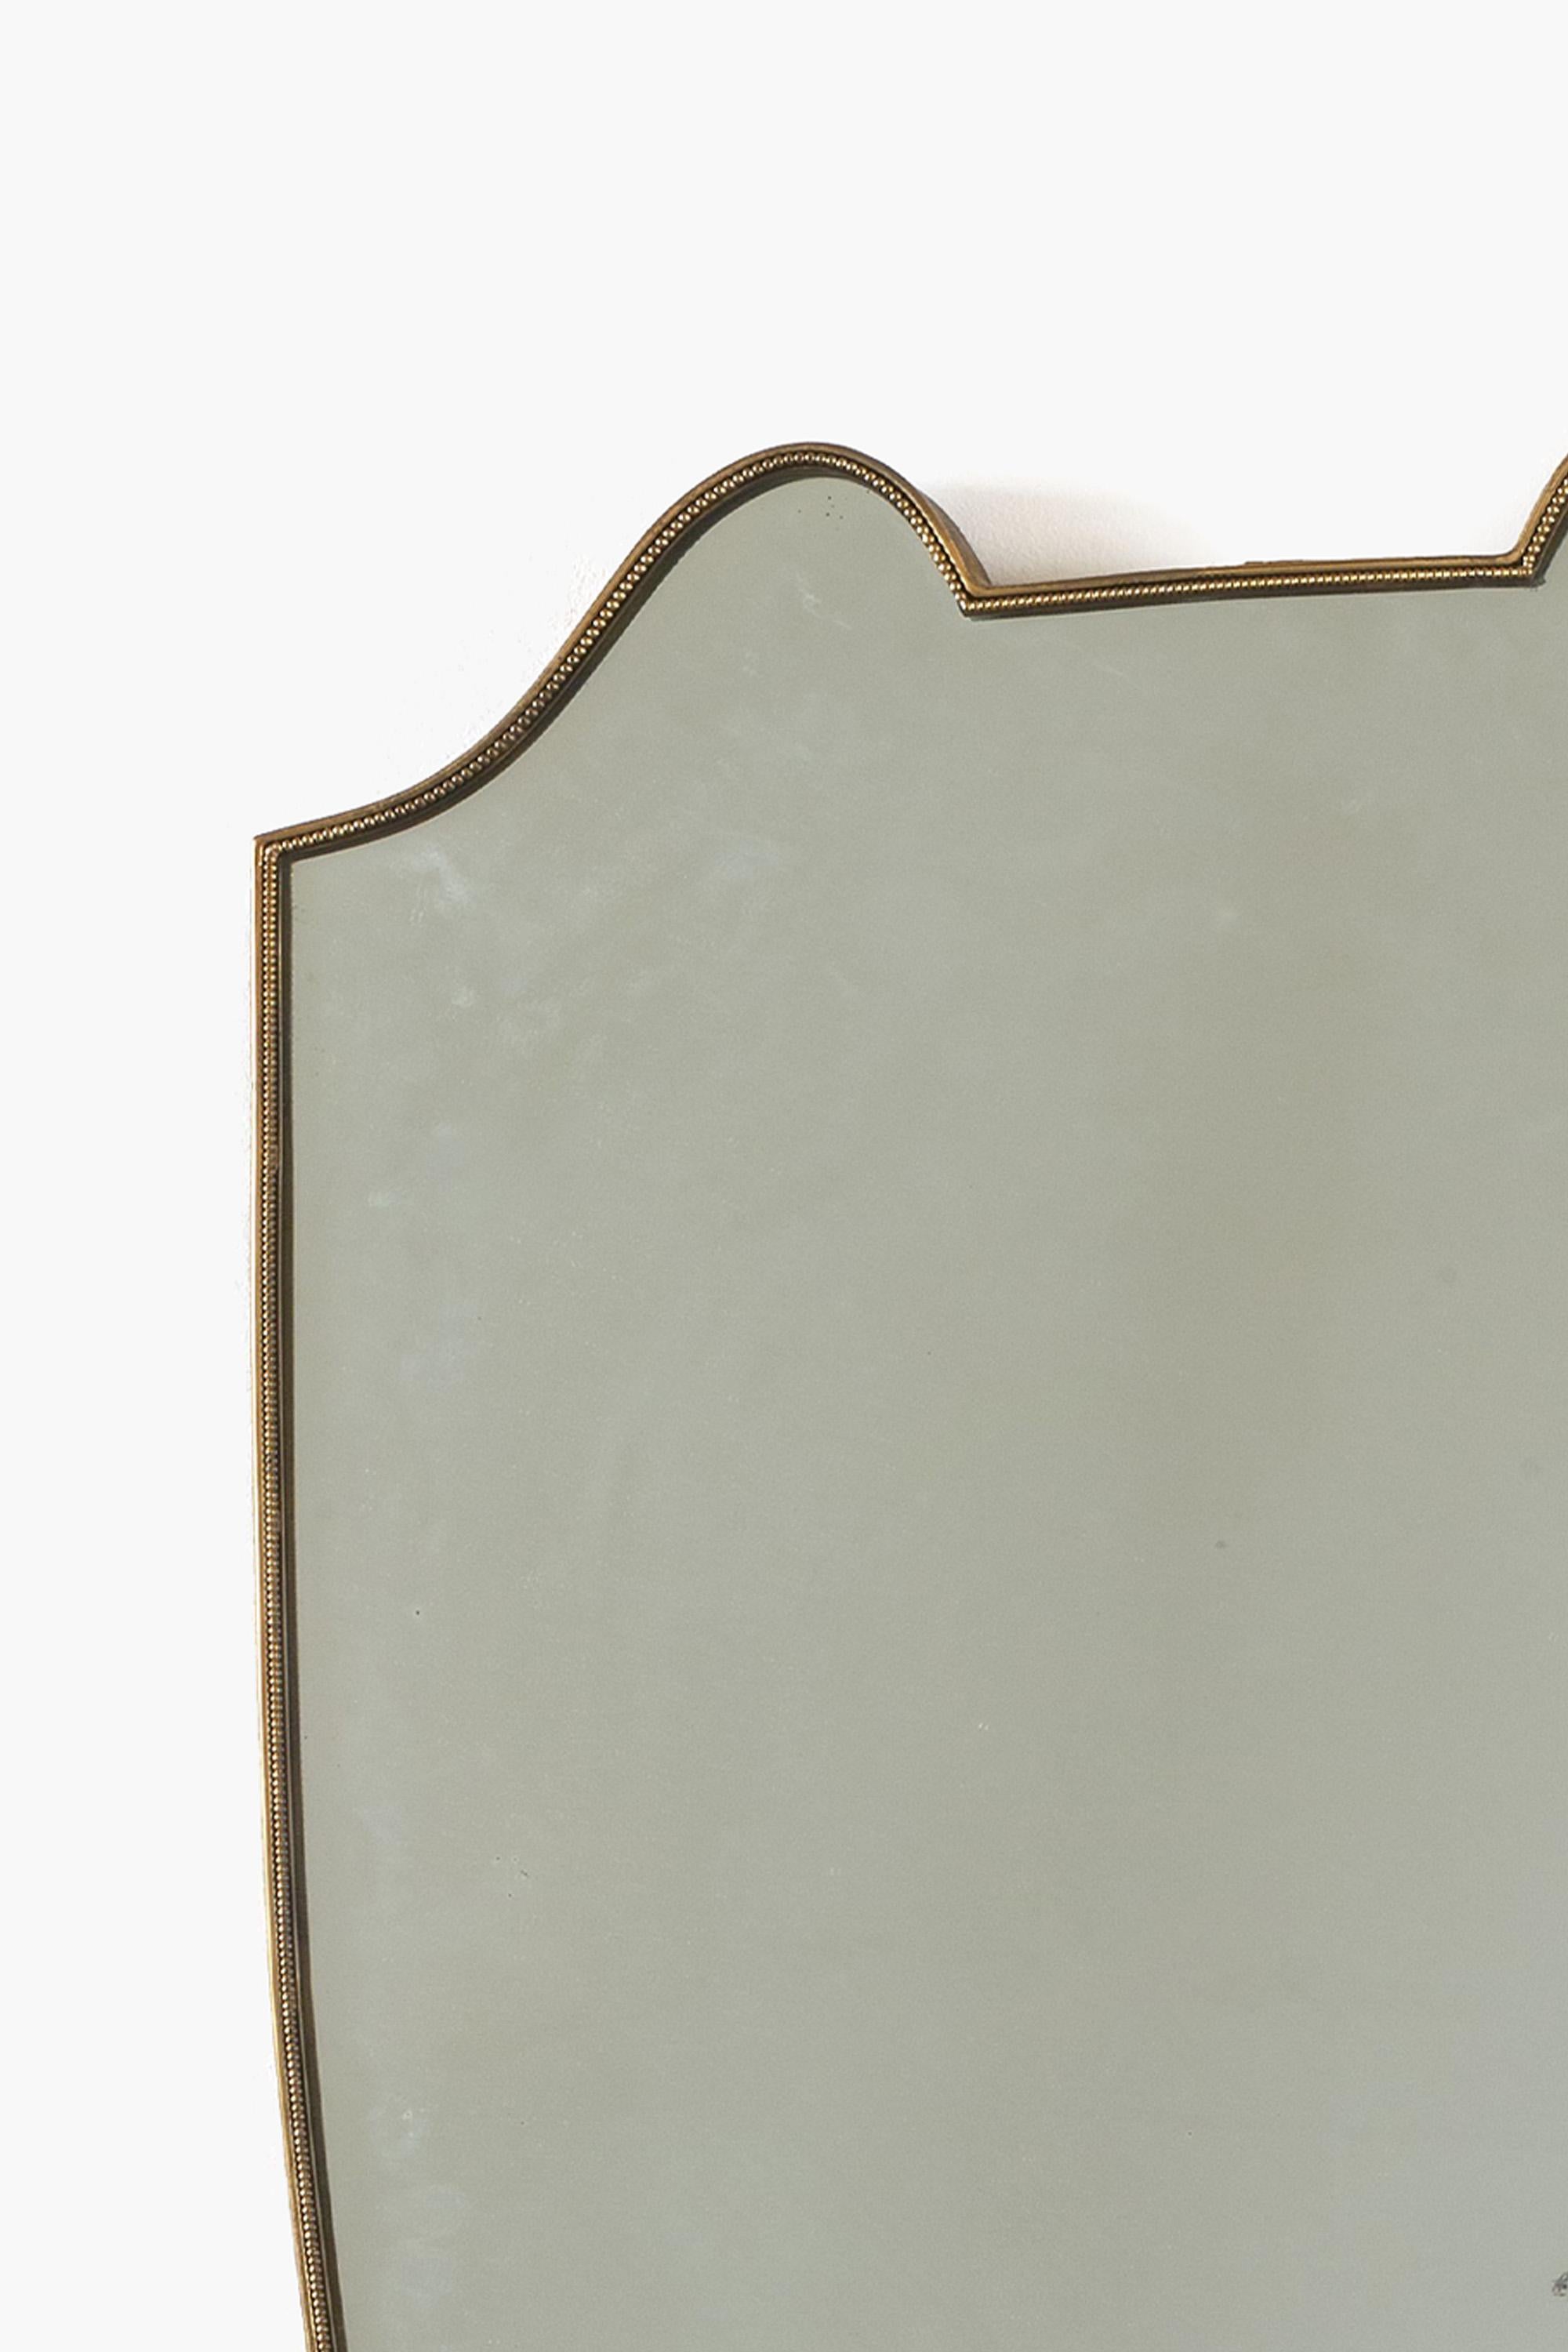 Mid-Century Modern Italian Brass Framed Shield Mirror in the style of Gio Ponti For Sale